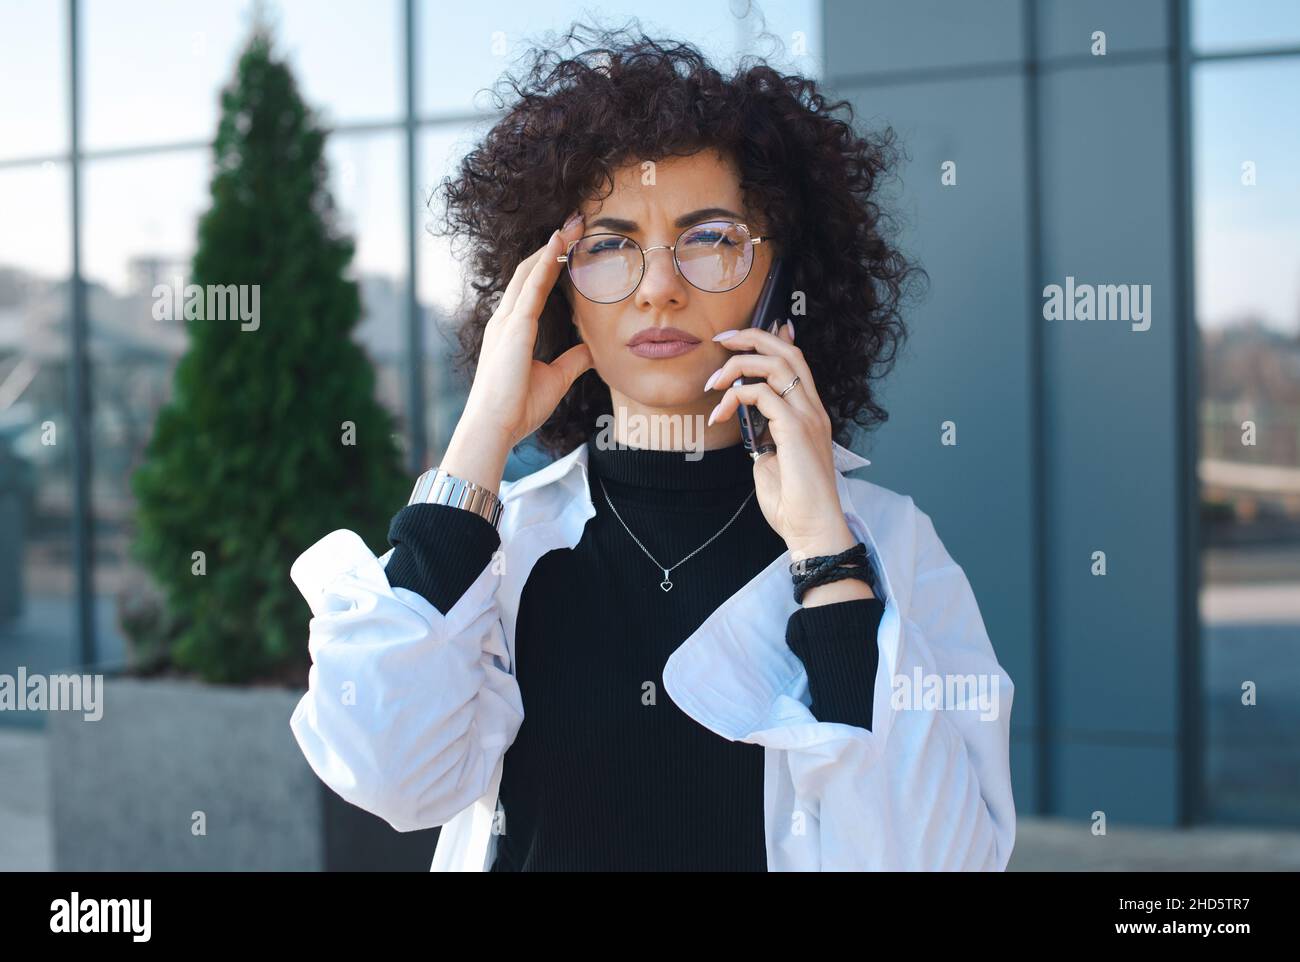 Curly manager frowning concerned speaking on cellphone outside. Close-up portrait of a caucasian woman looking on camera. Mobile phone talk concept Stock Photo